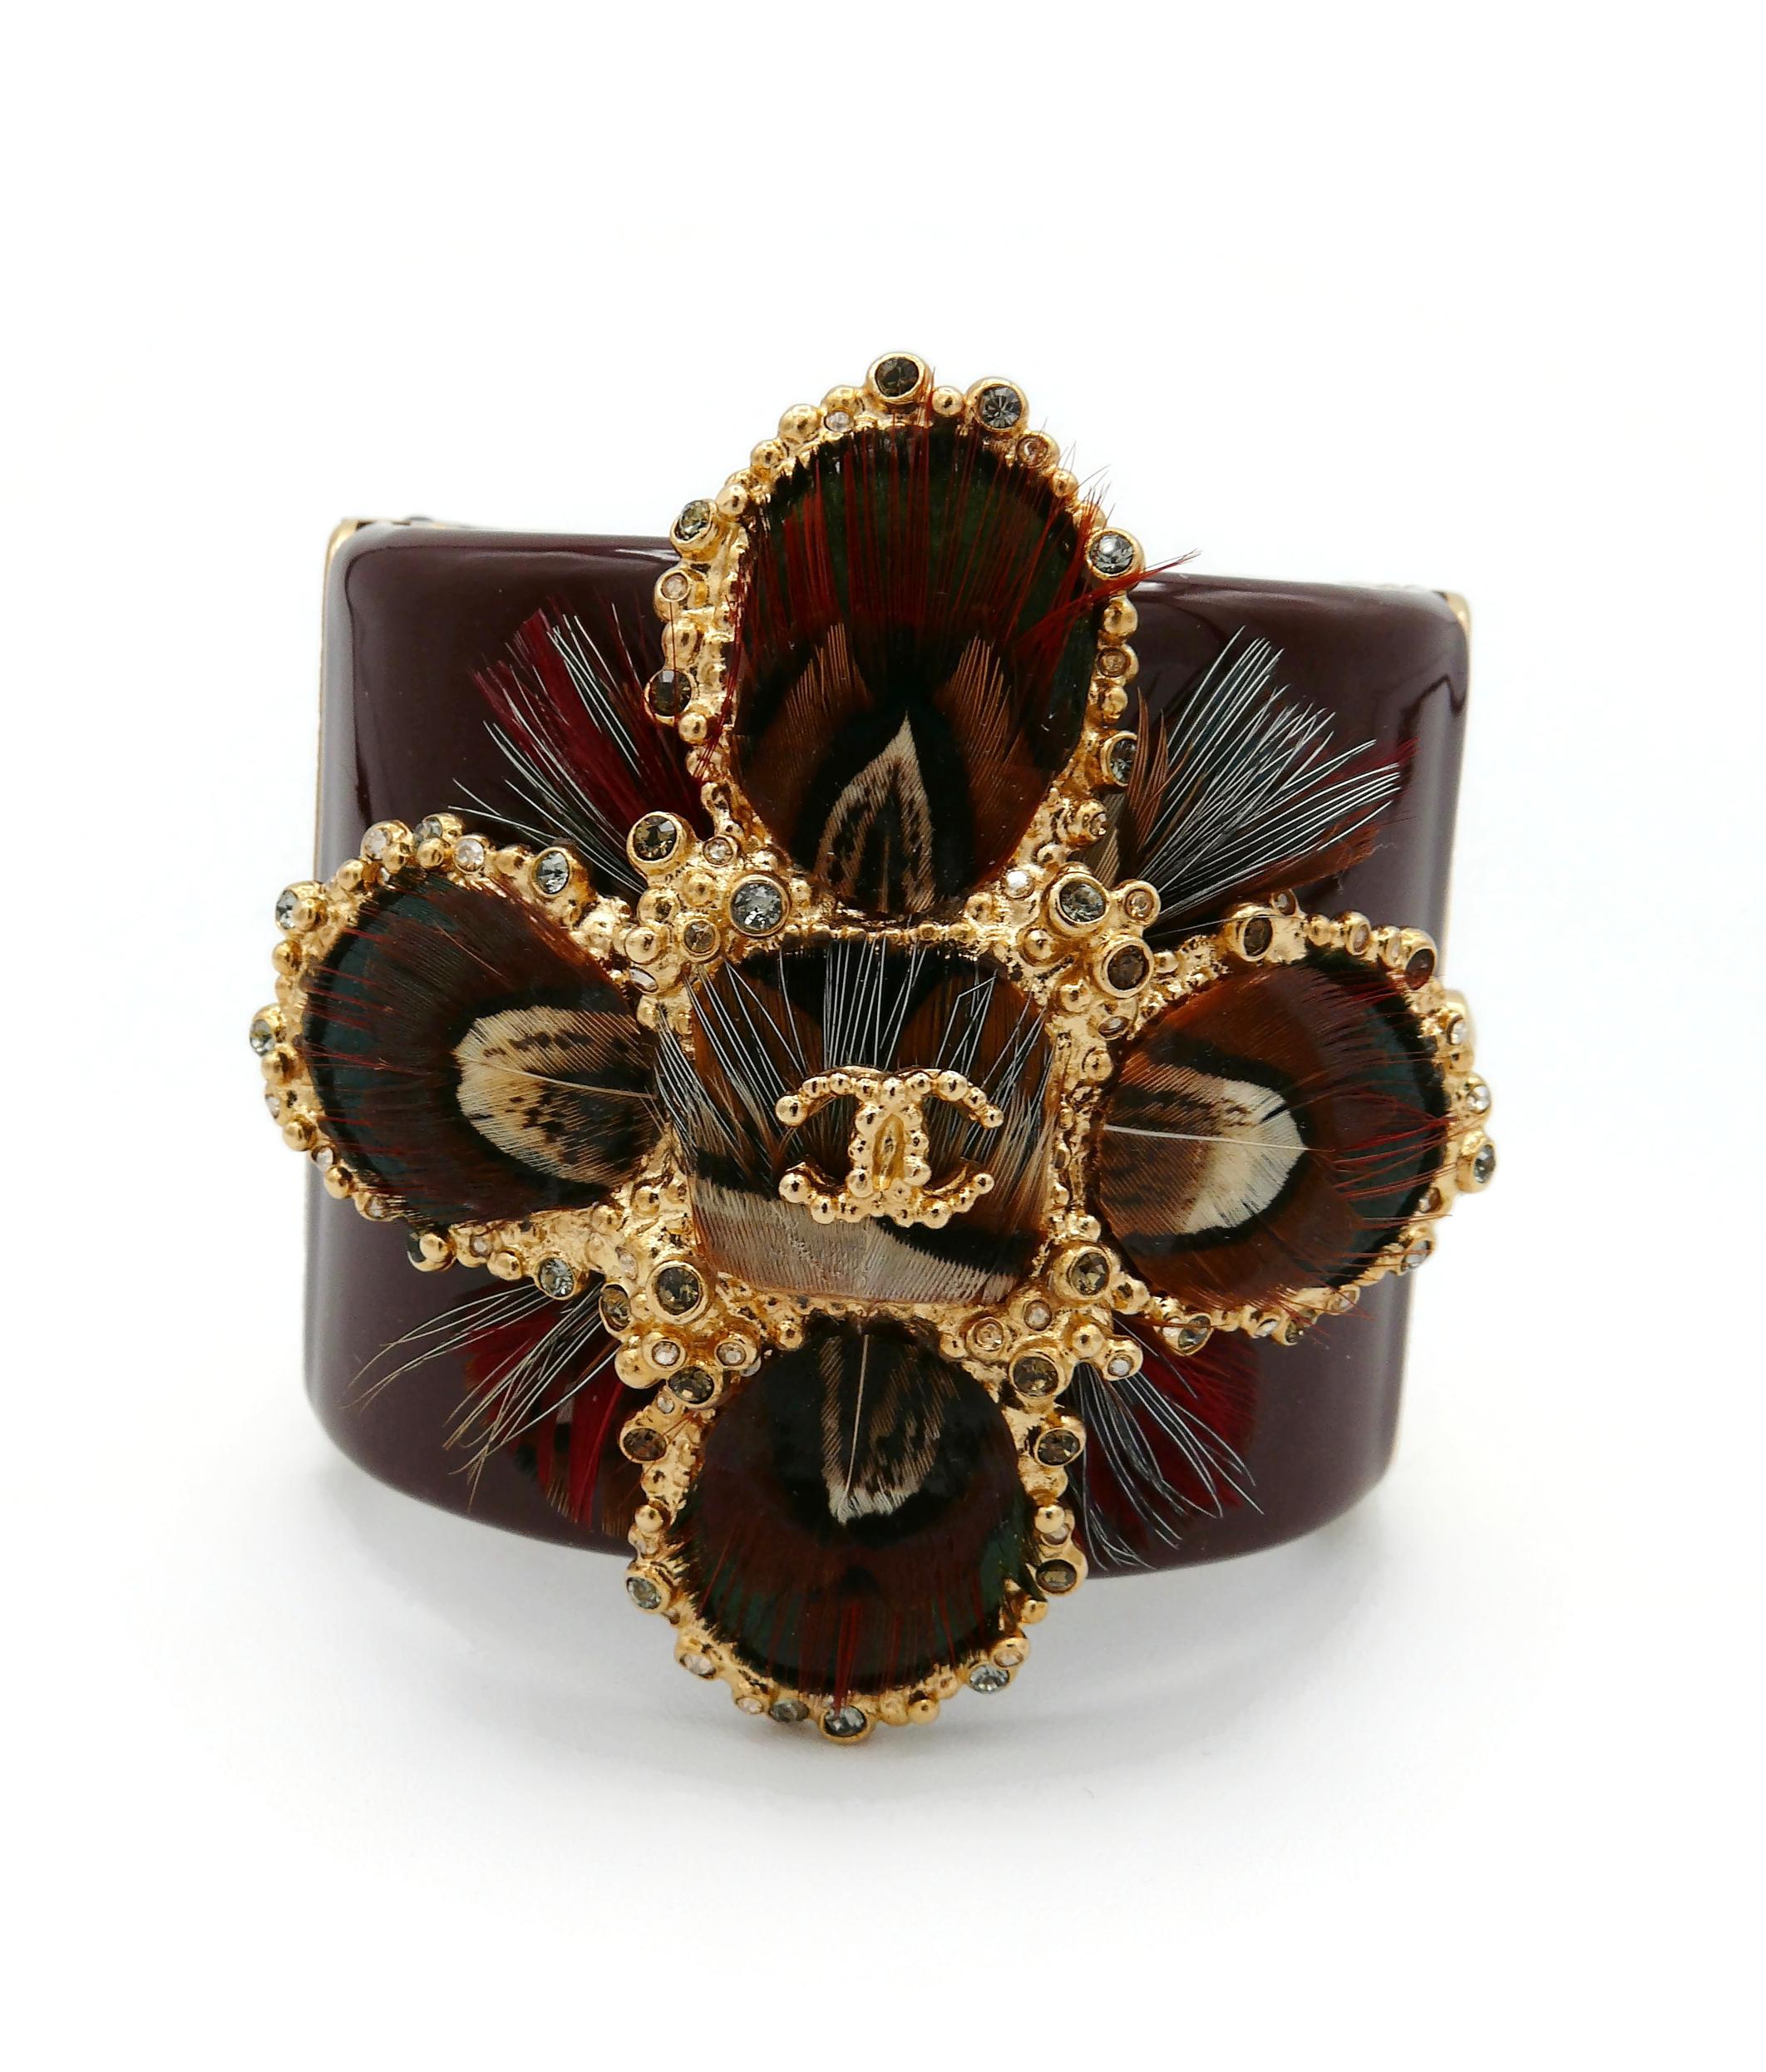 Chanel Burgundy Resin and Feather Cross Cuff Bracelet, Pre-Fall 2013 Collection For Sale 1